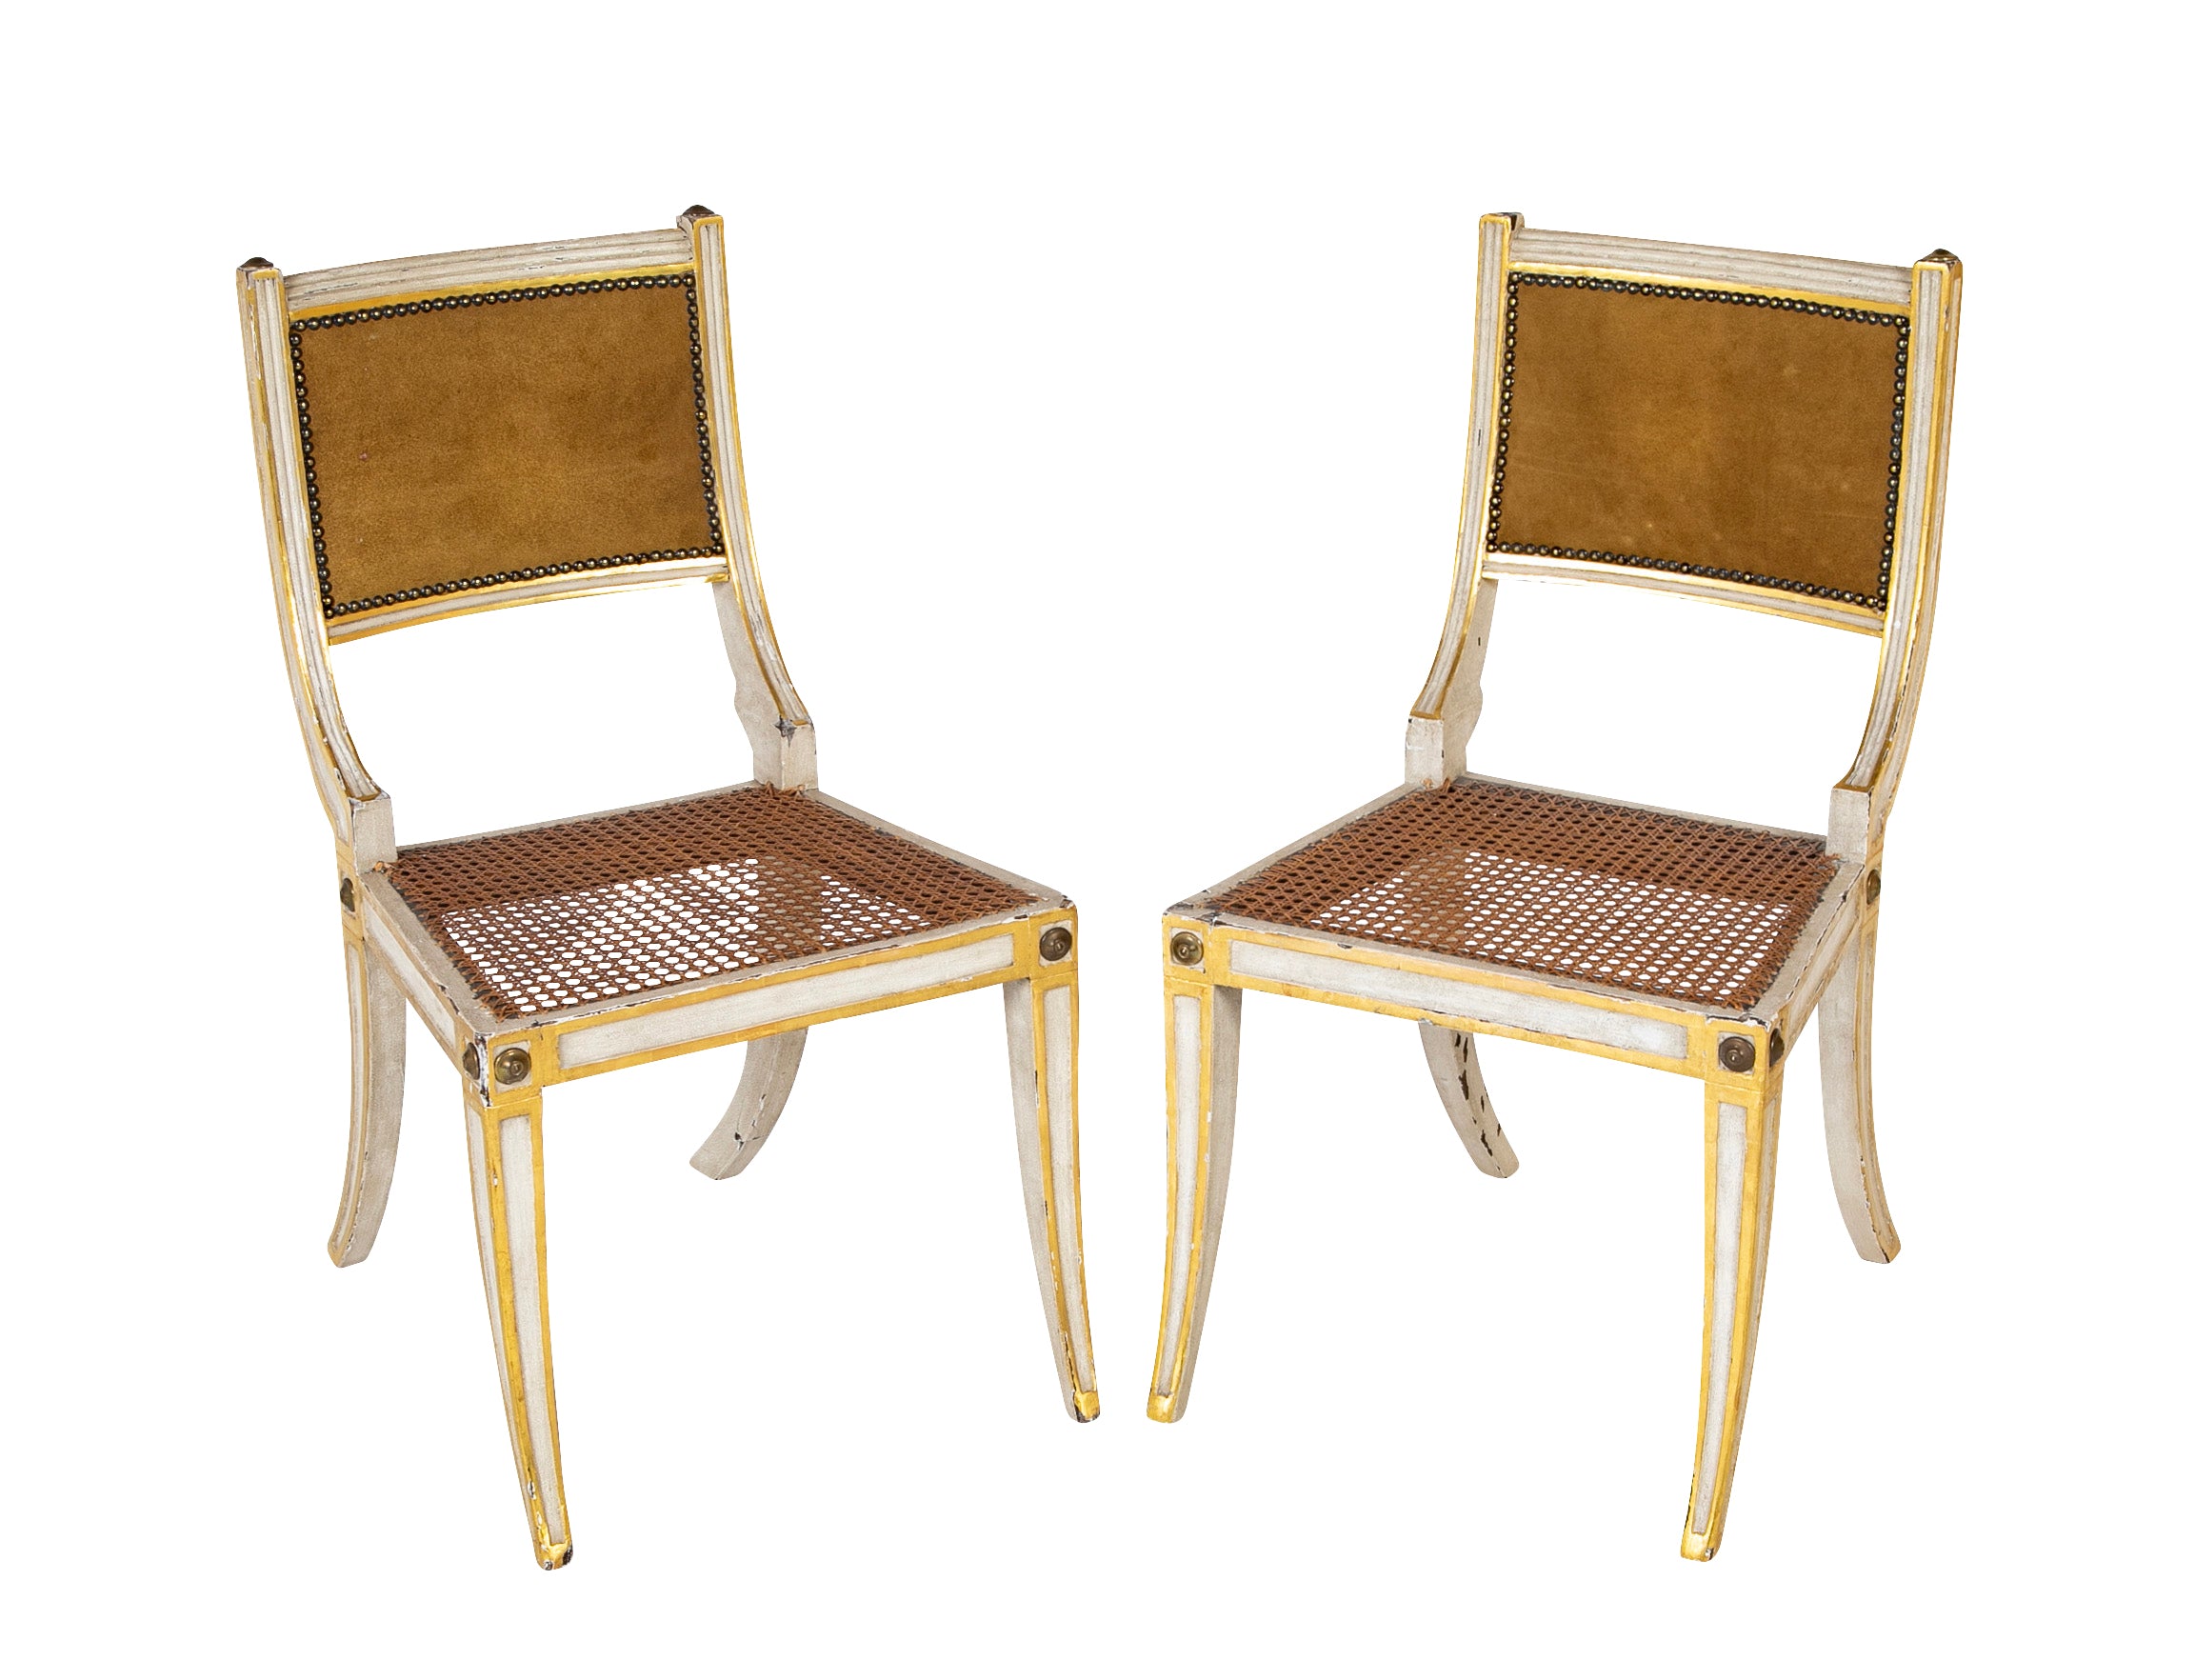 Pair of 19th Century Continental Painted Klismos Chairs